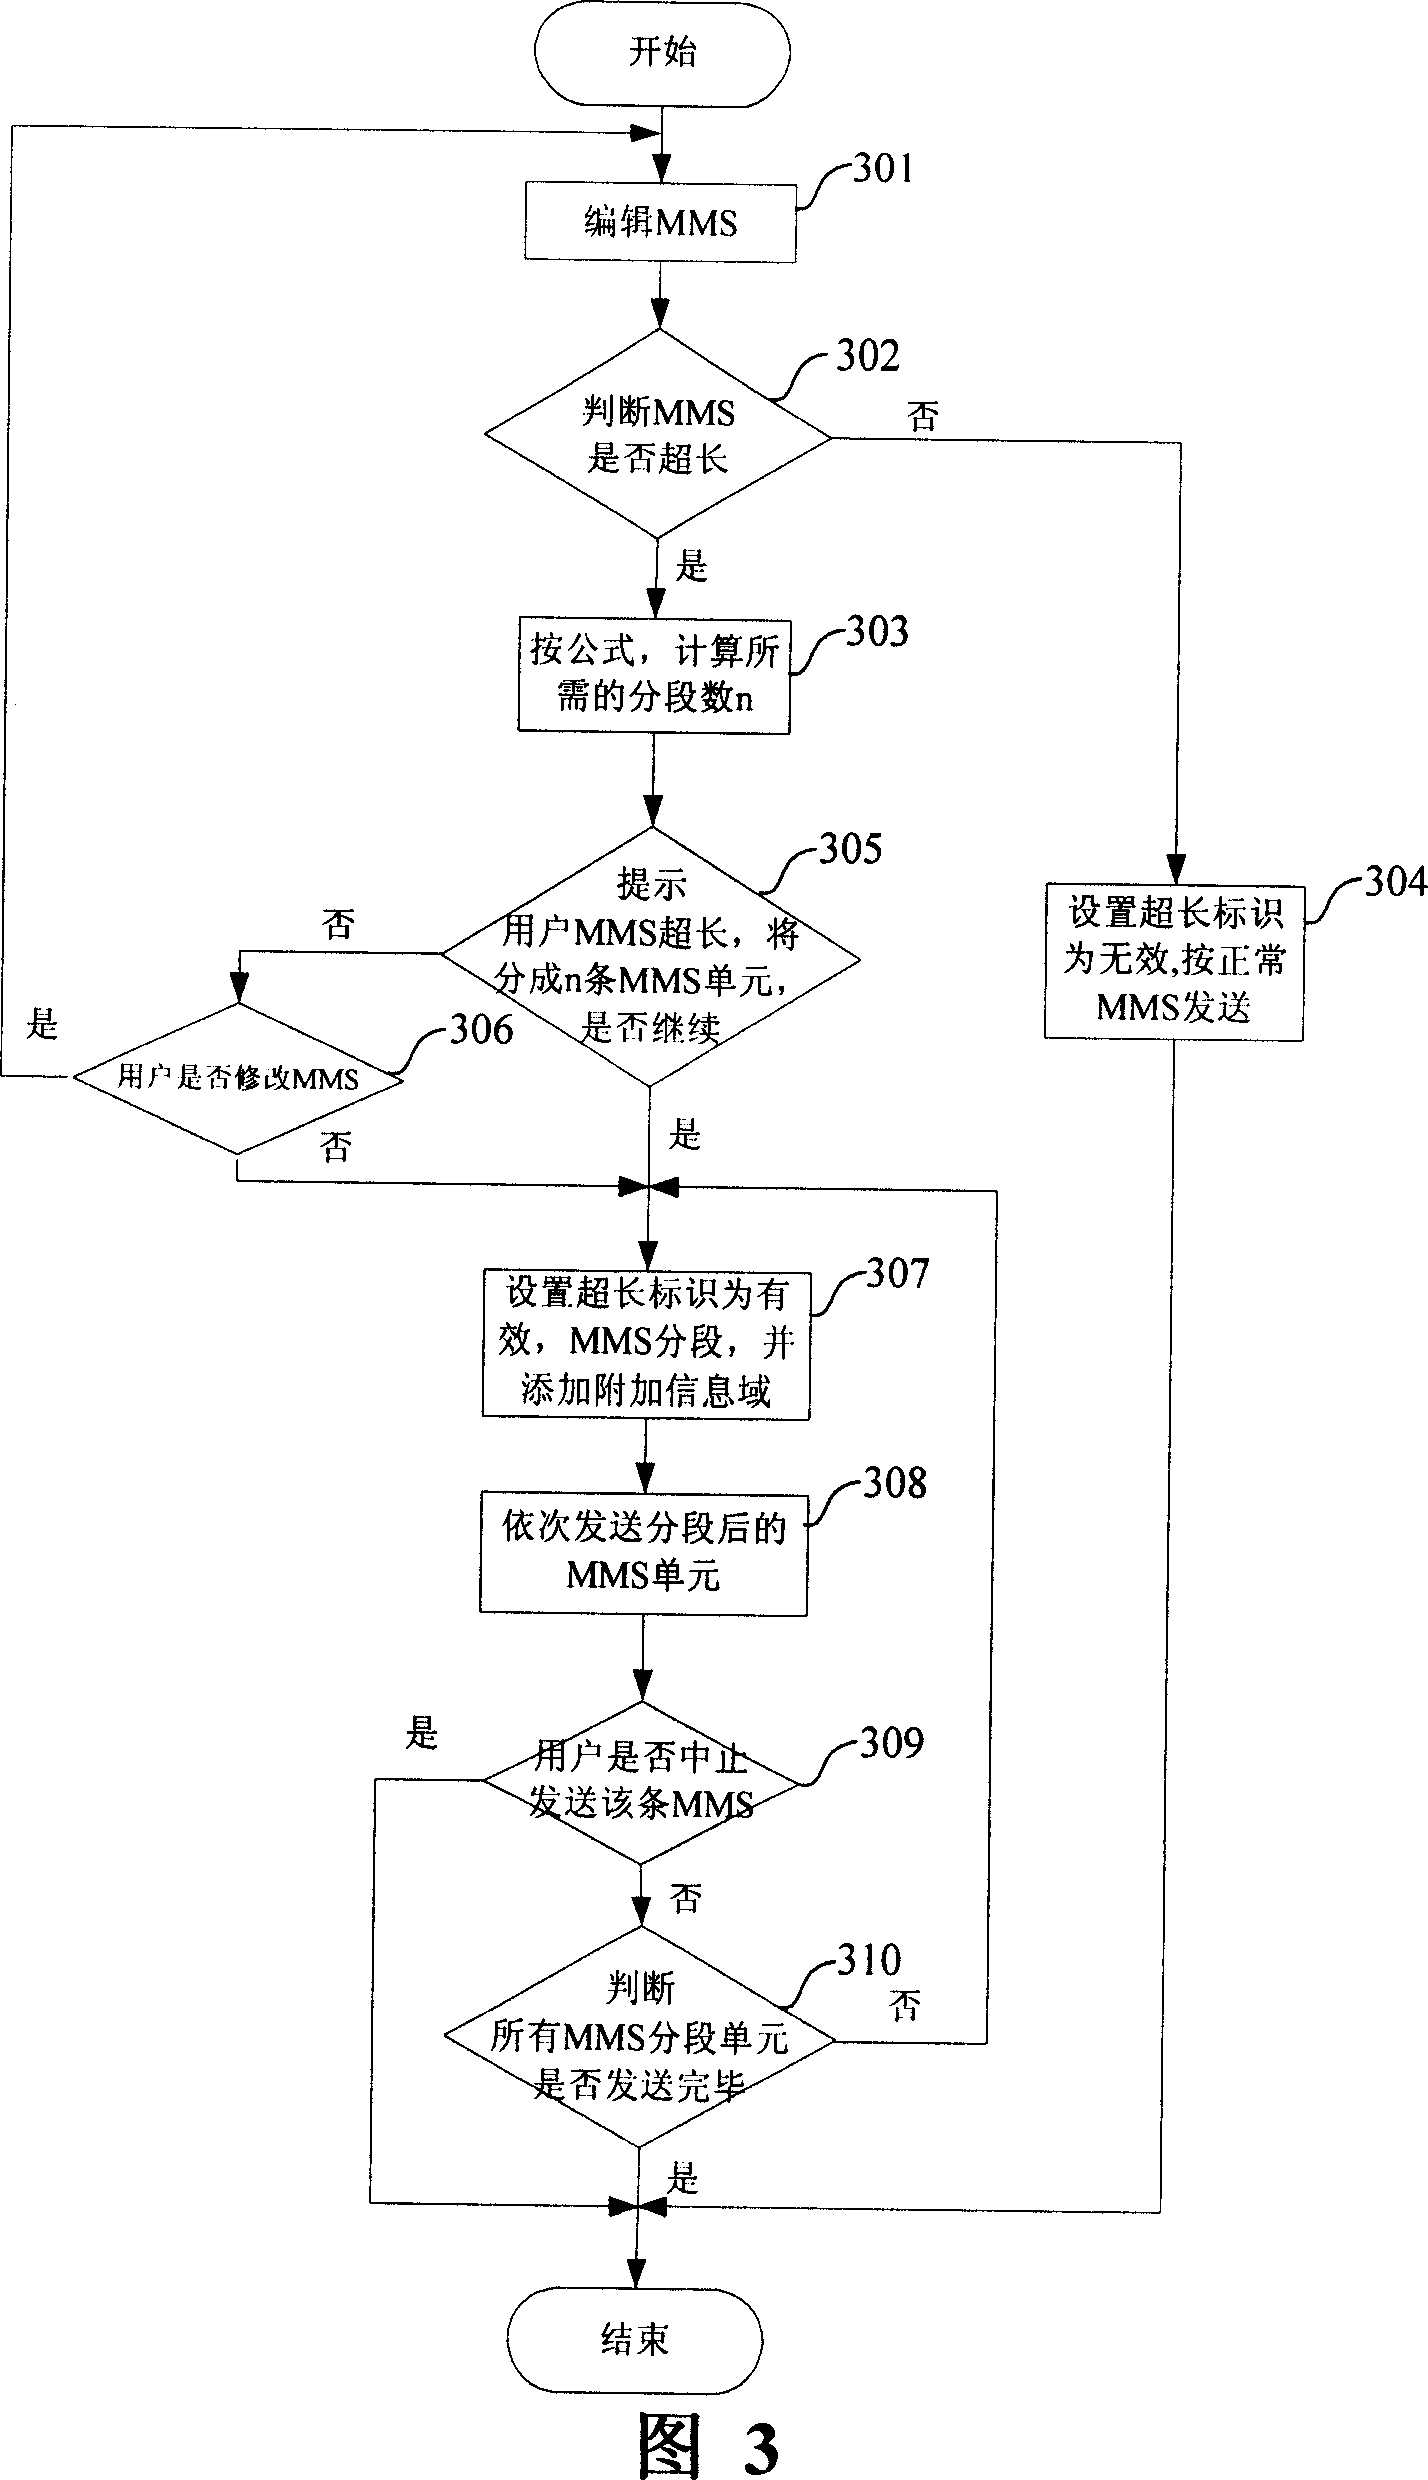 A method for receiving and sending multimedia information